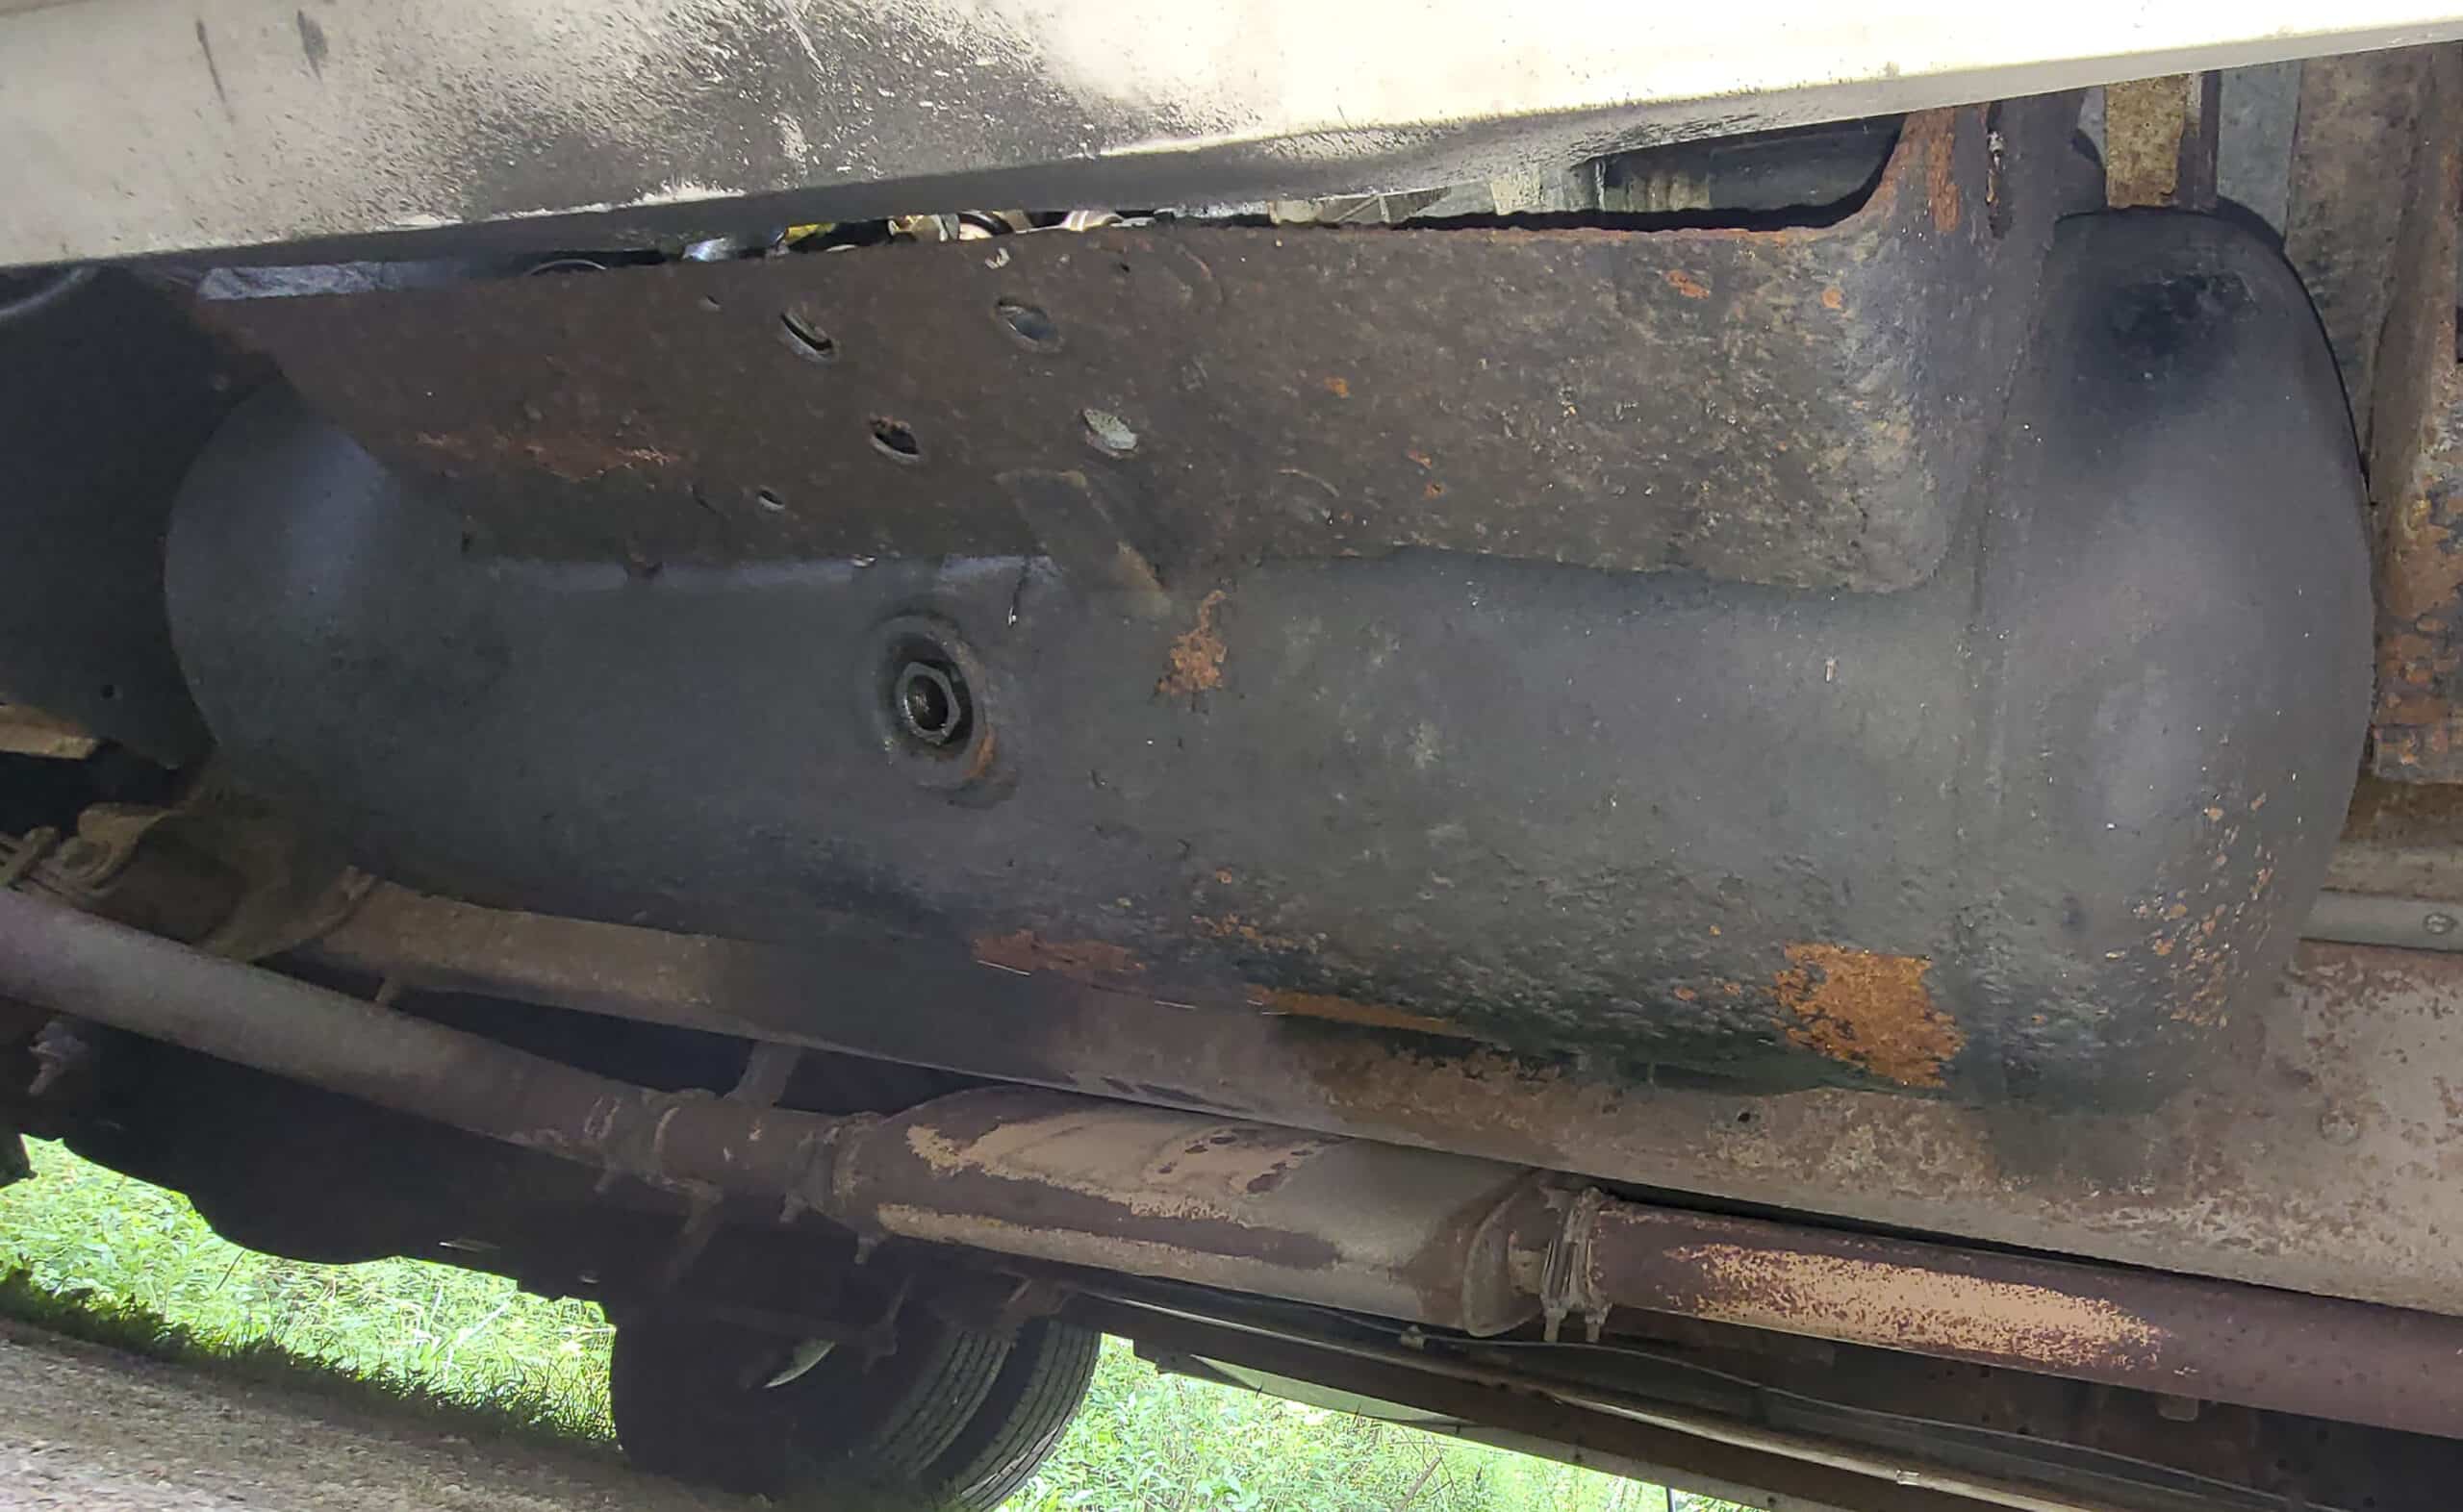 A view under a motorhome.  A large black cylindrical propane tank is seen.  There is minor surface rust in one section.